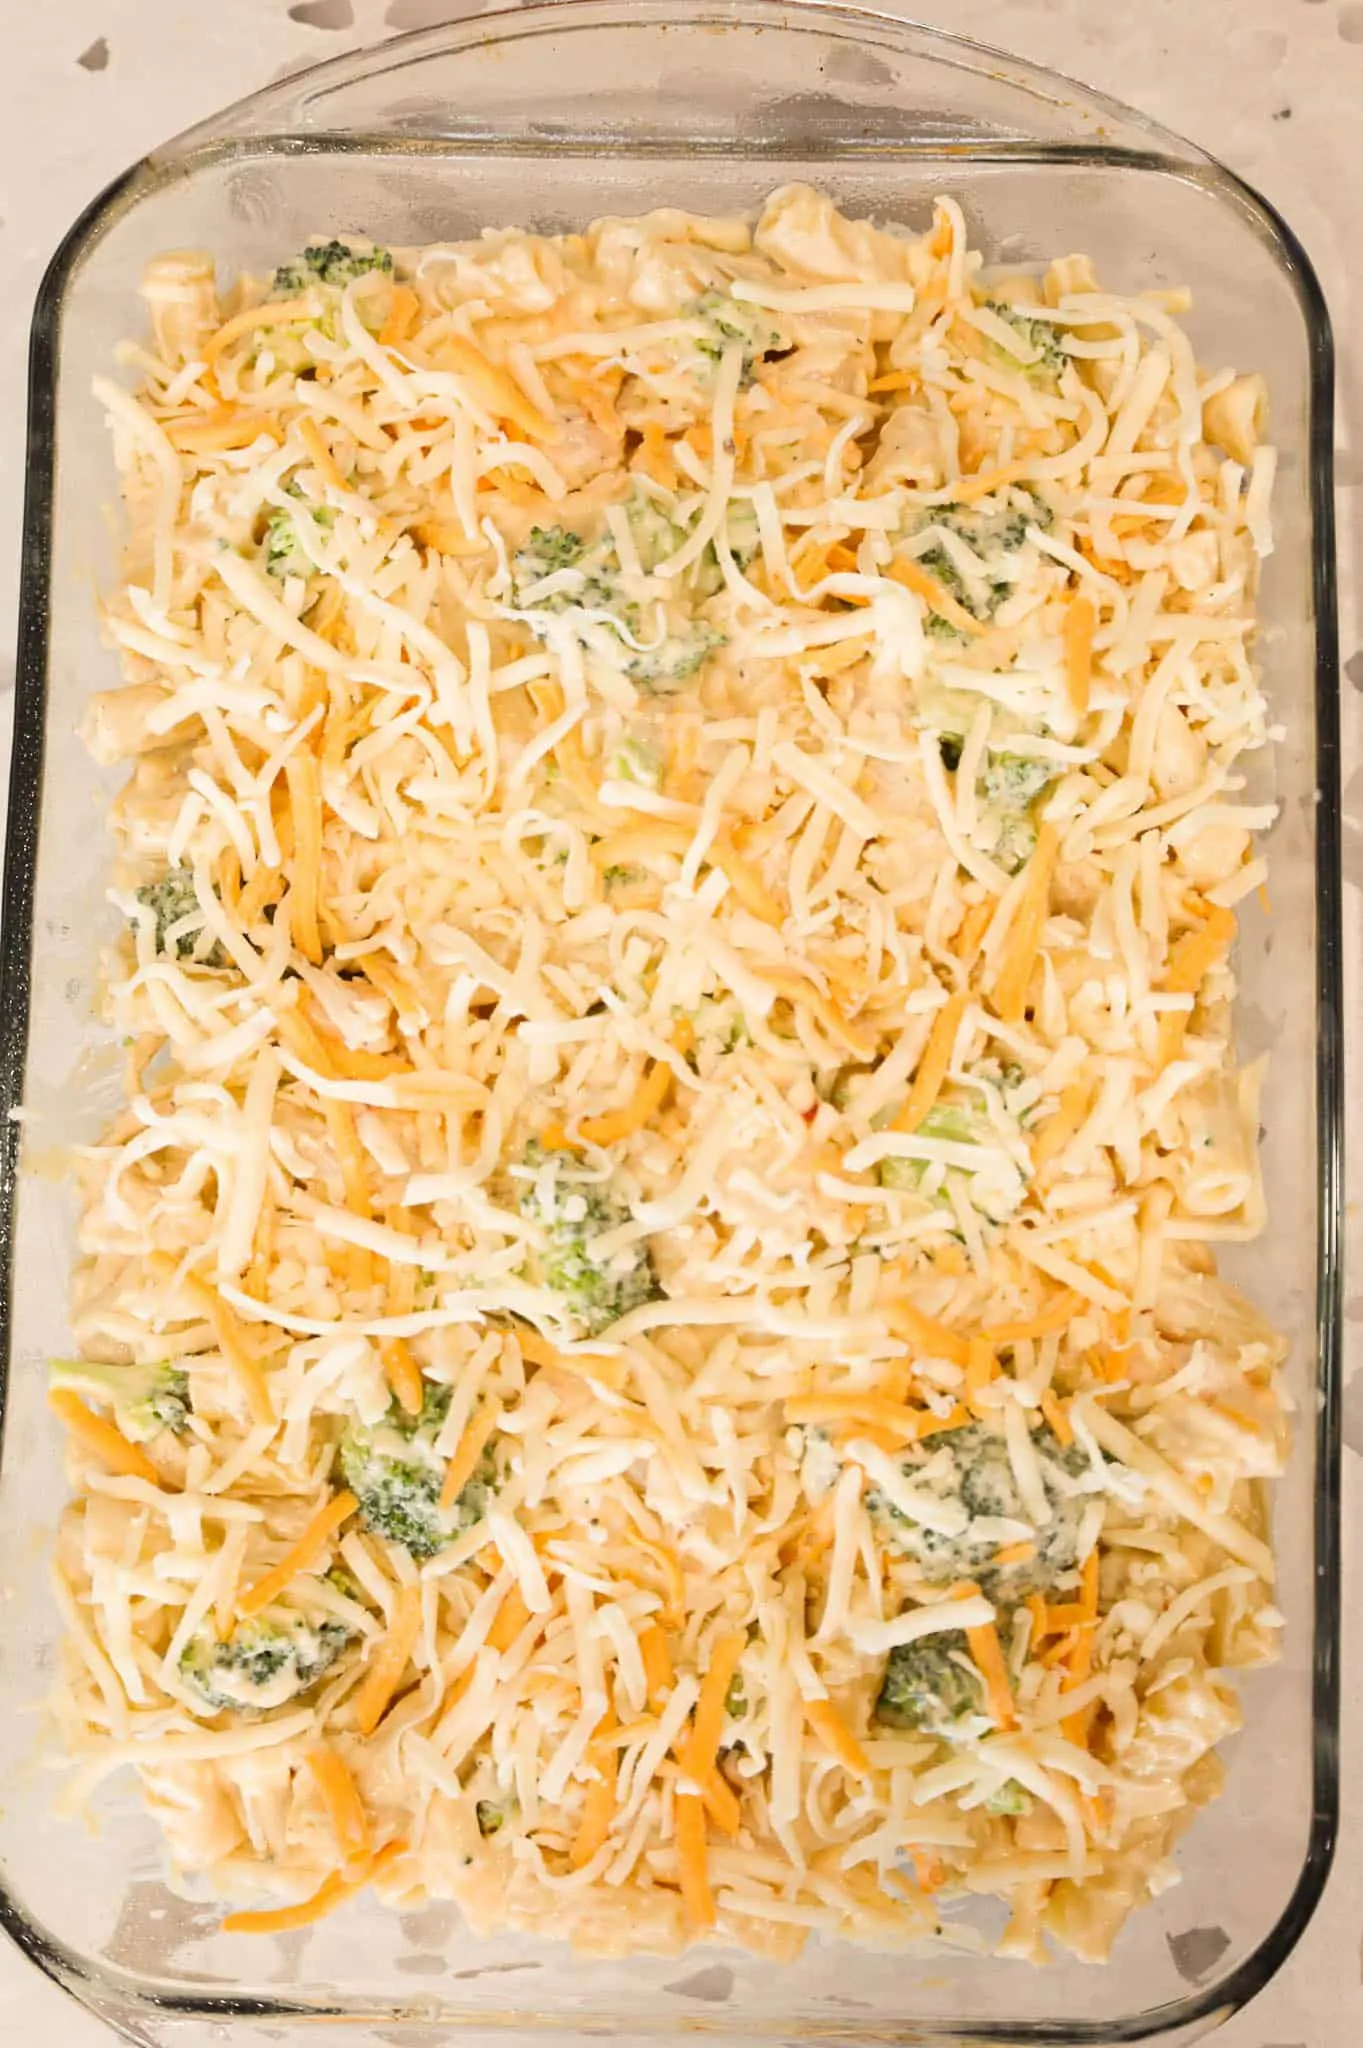 shredded cheese on top of creamy chicken and broccoli ziti mixture in a baking dish